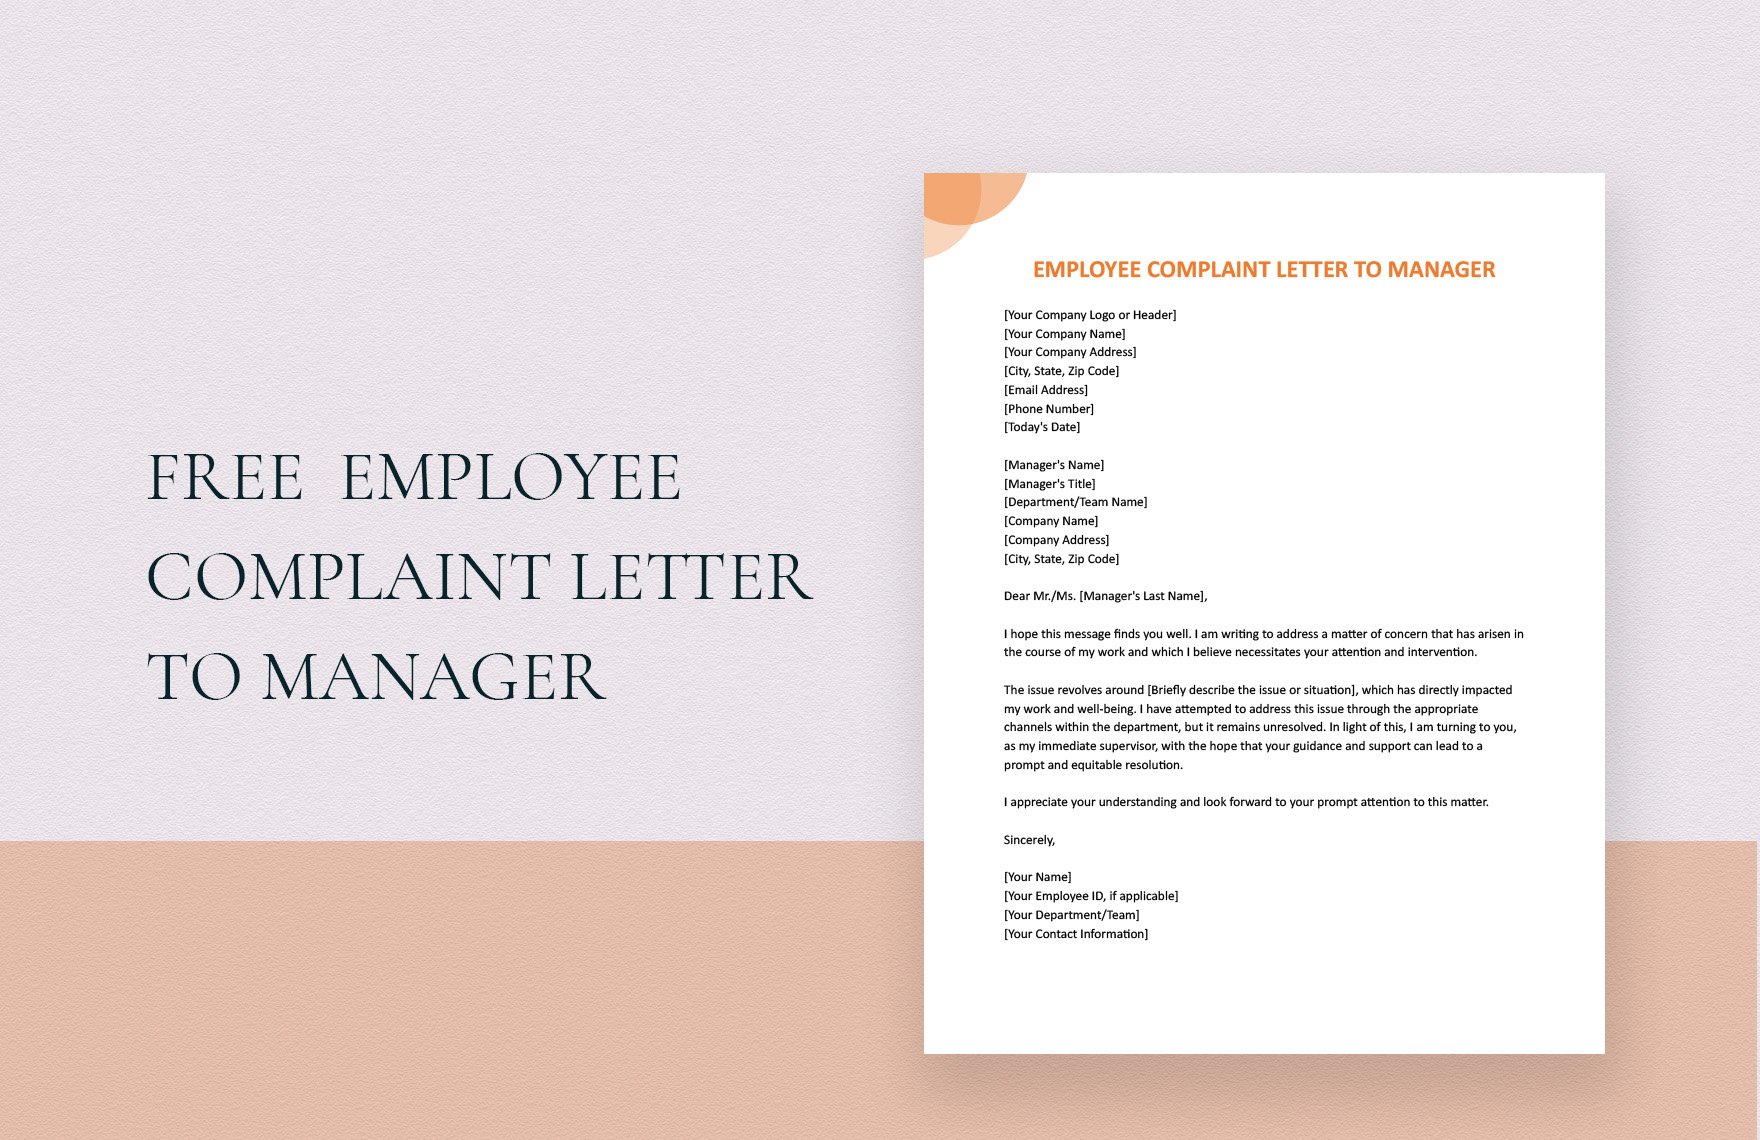 Employee Complaint Letter To Manager